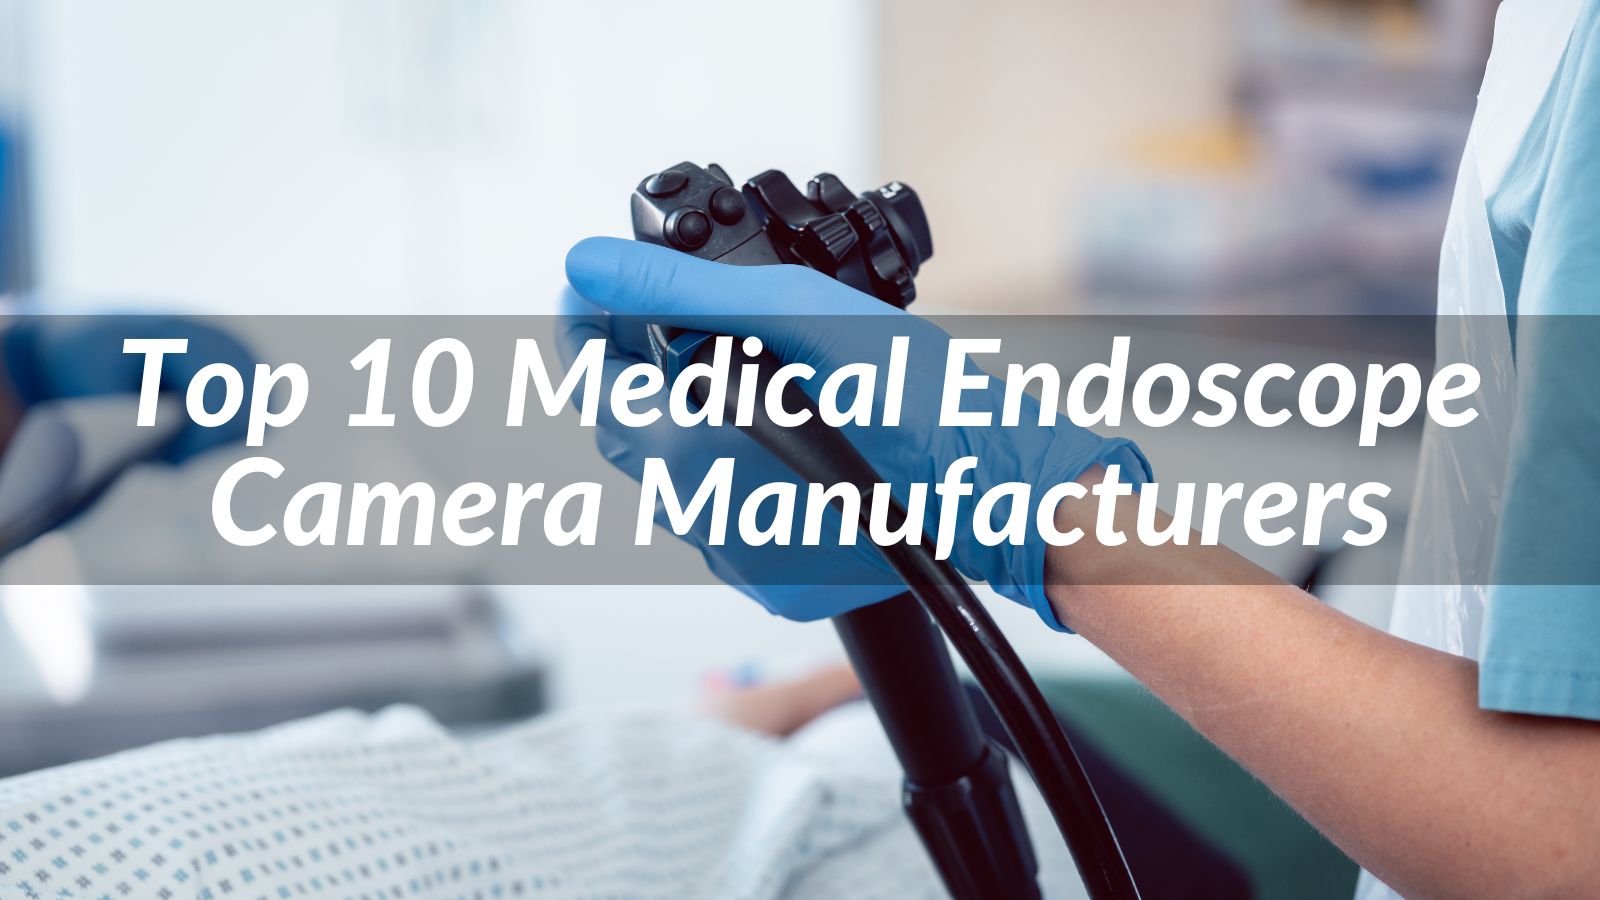 Endoscopy Cameras products for sale